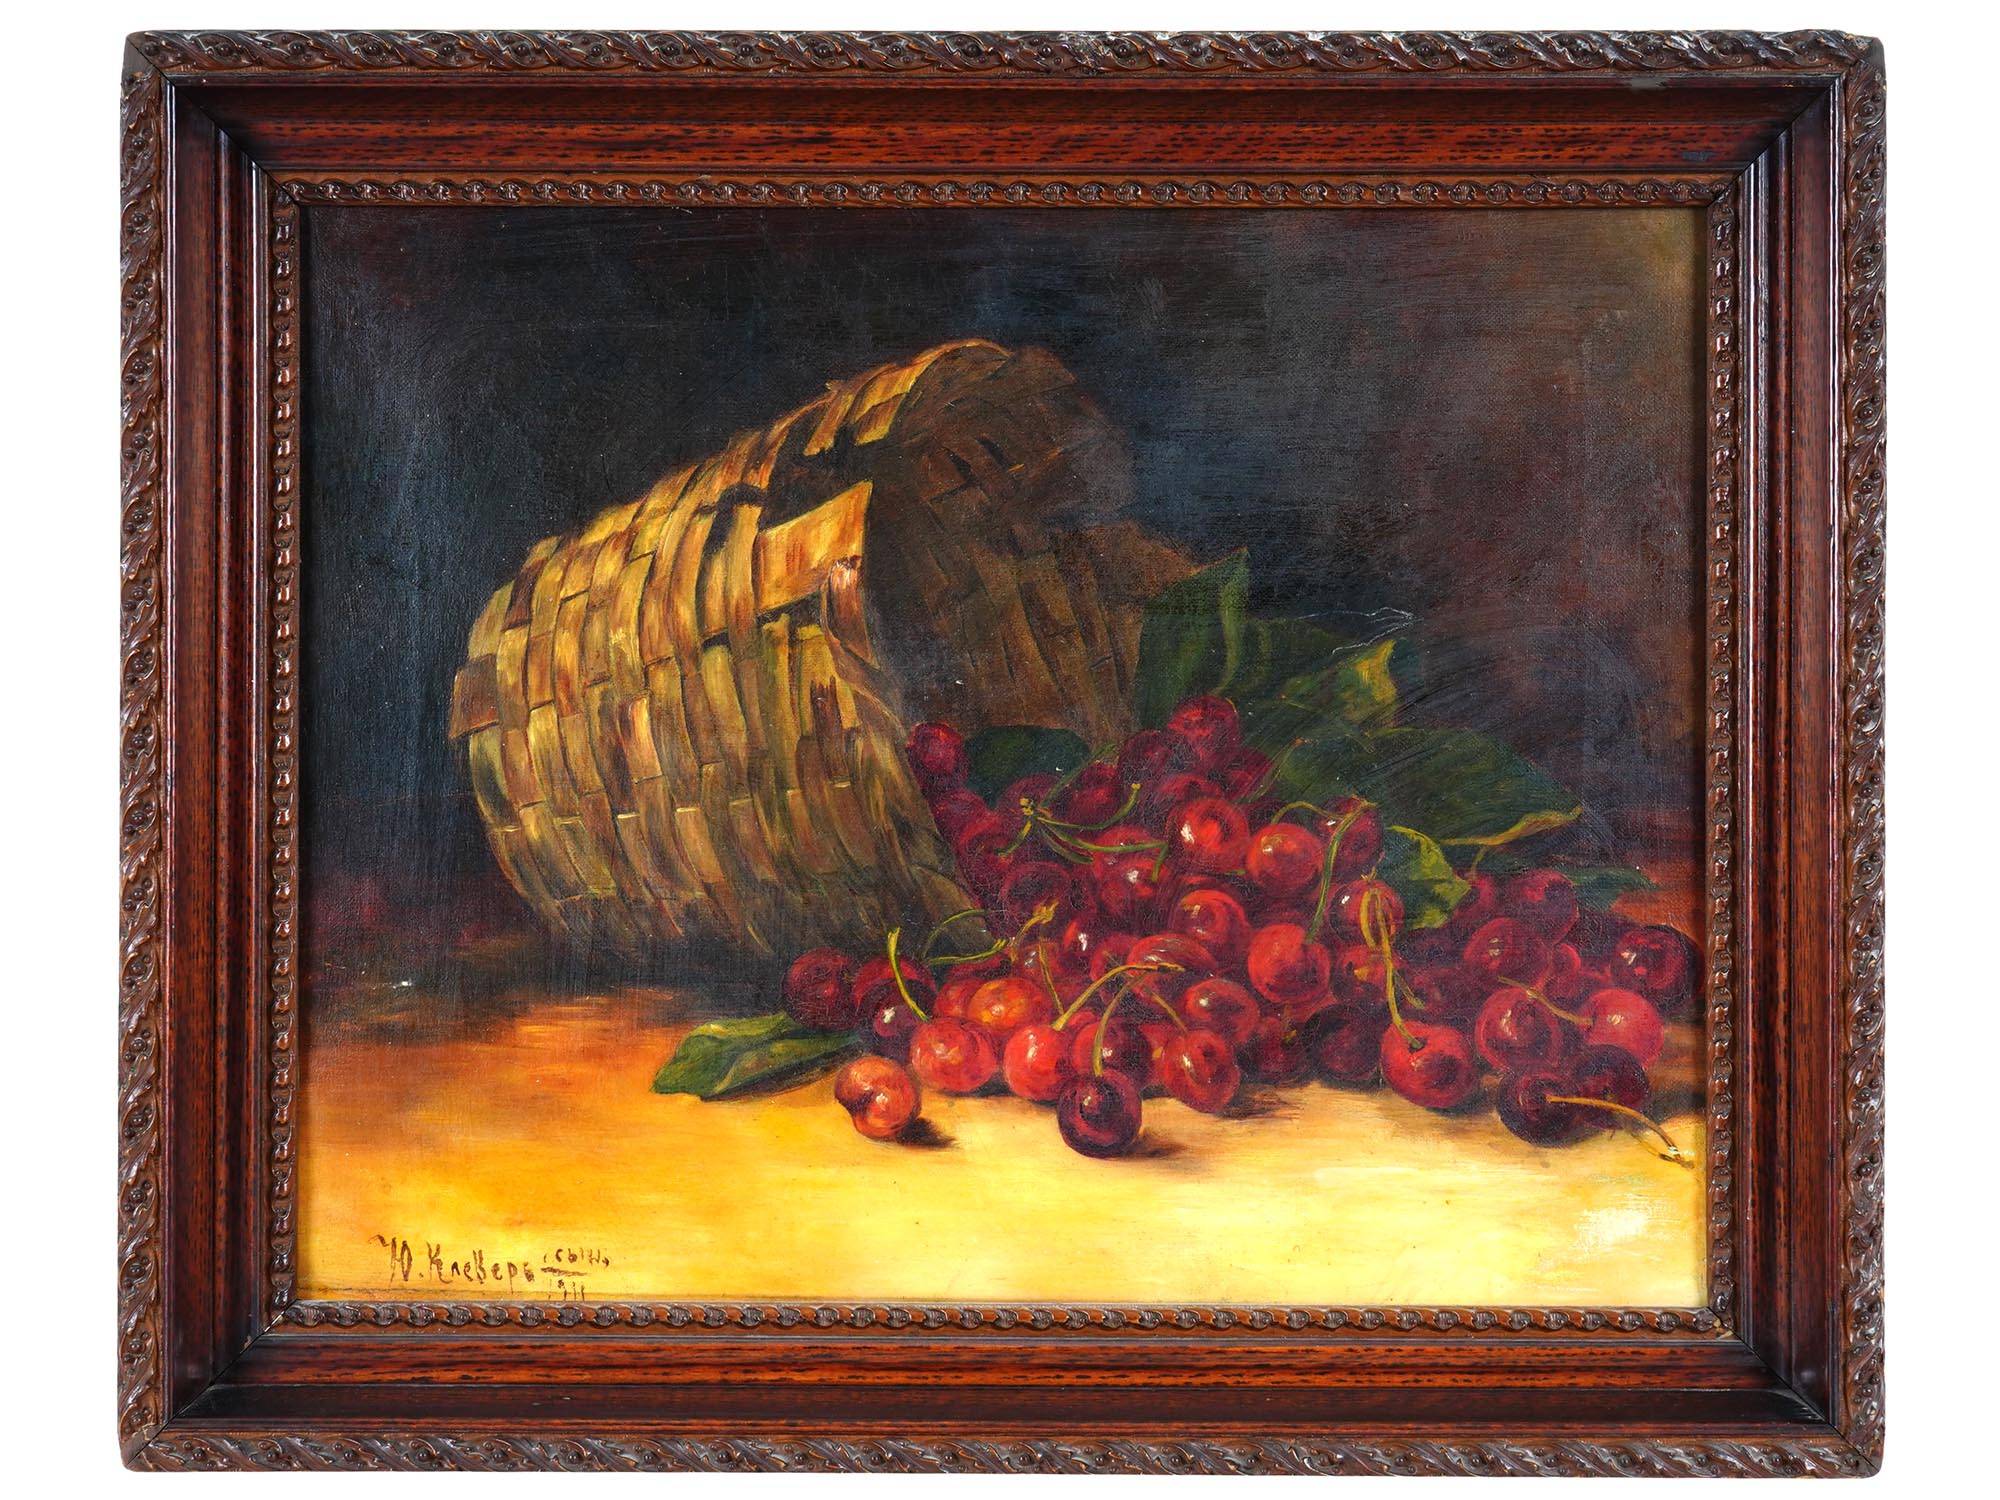 RUSSIAN STILL LIFE OIL PAINTING BY JULIUS KLEVER JR PIC-0